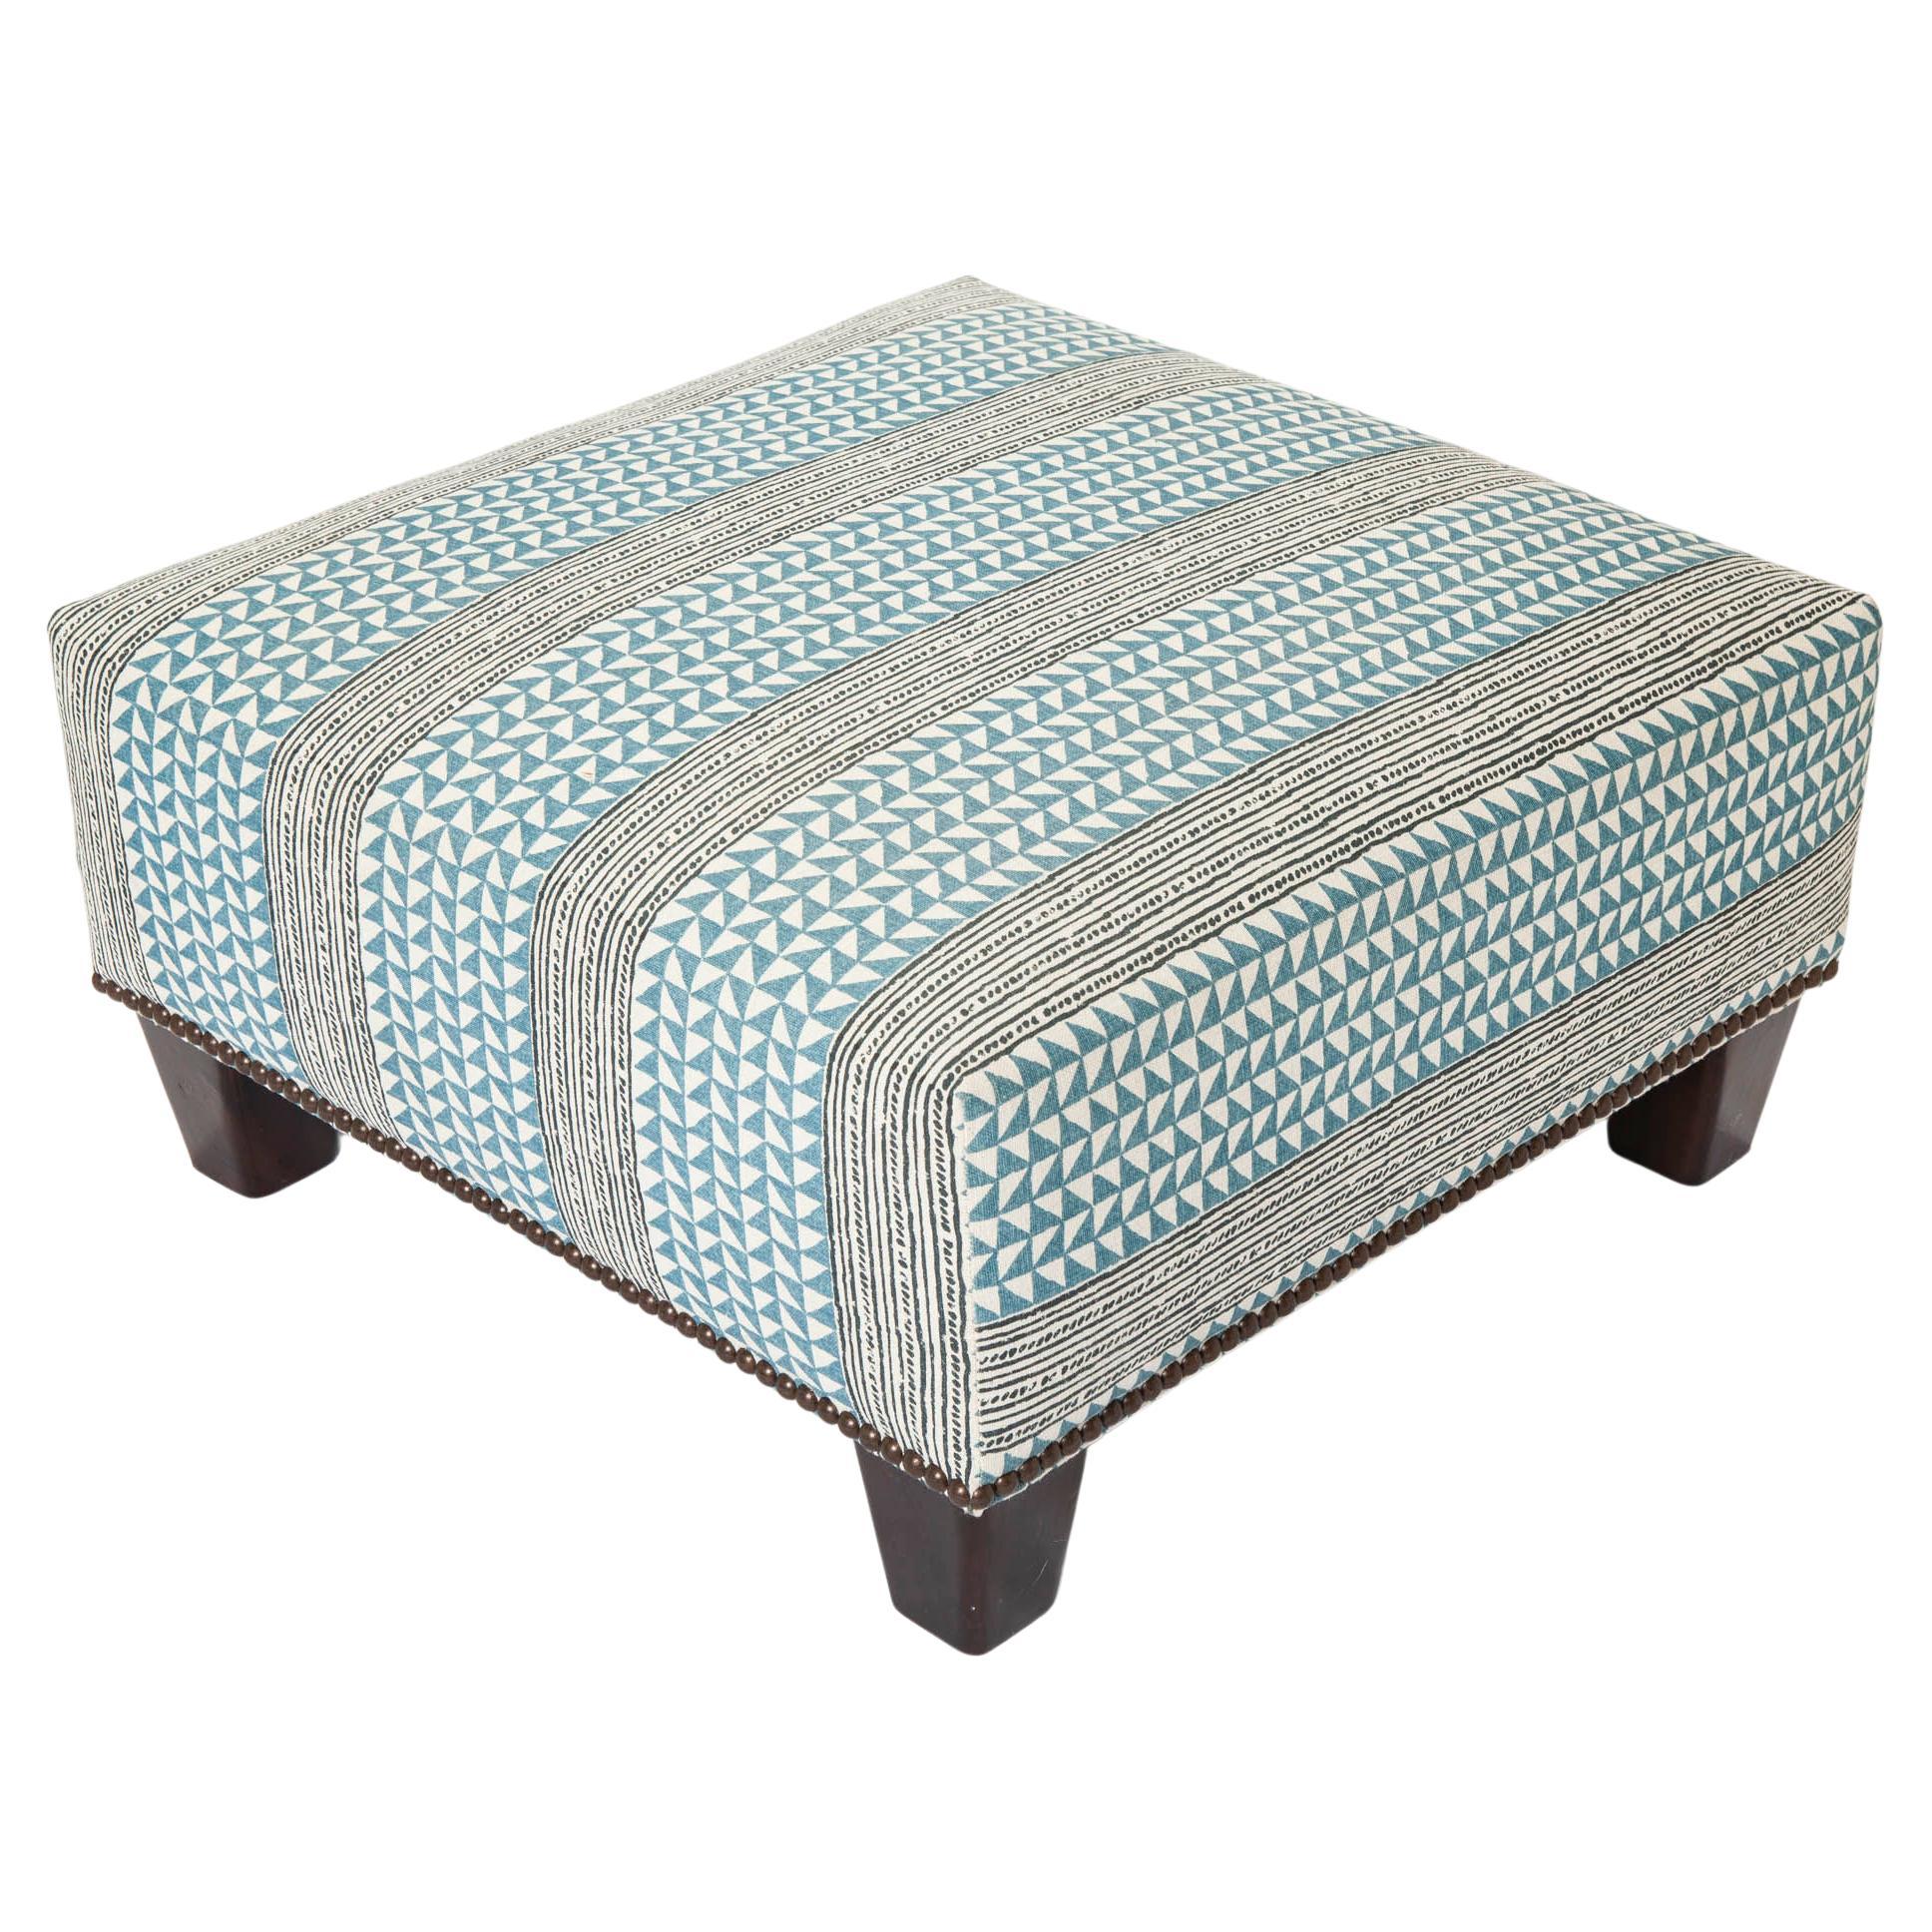 Large Square Ottoman in Tribal Printed Linen